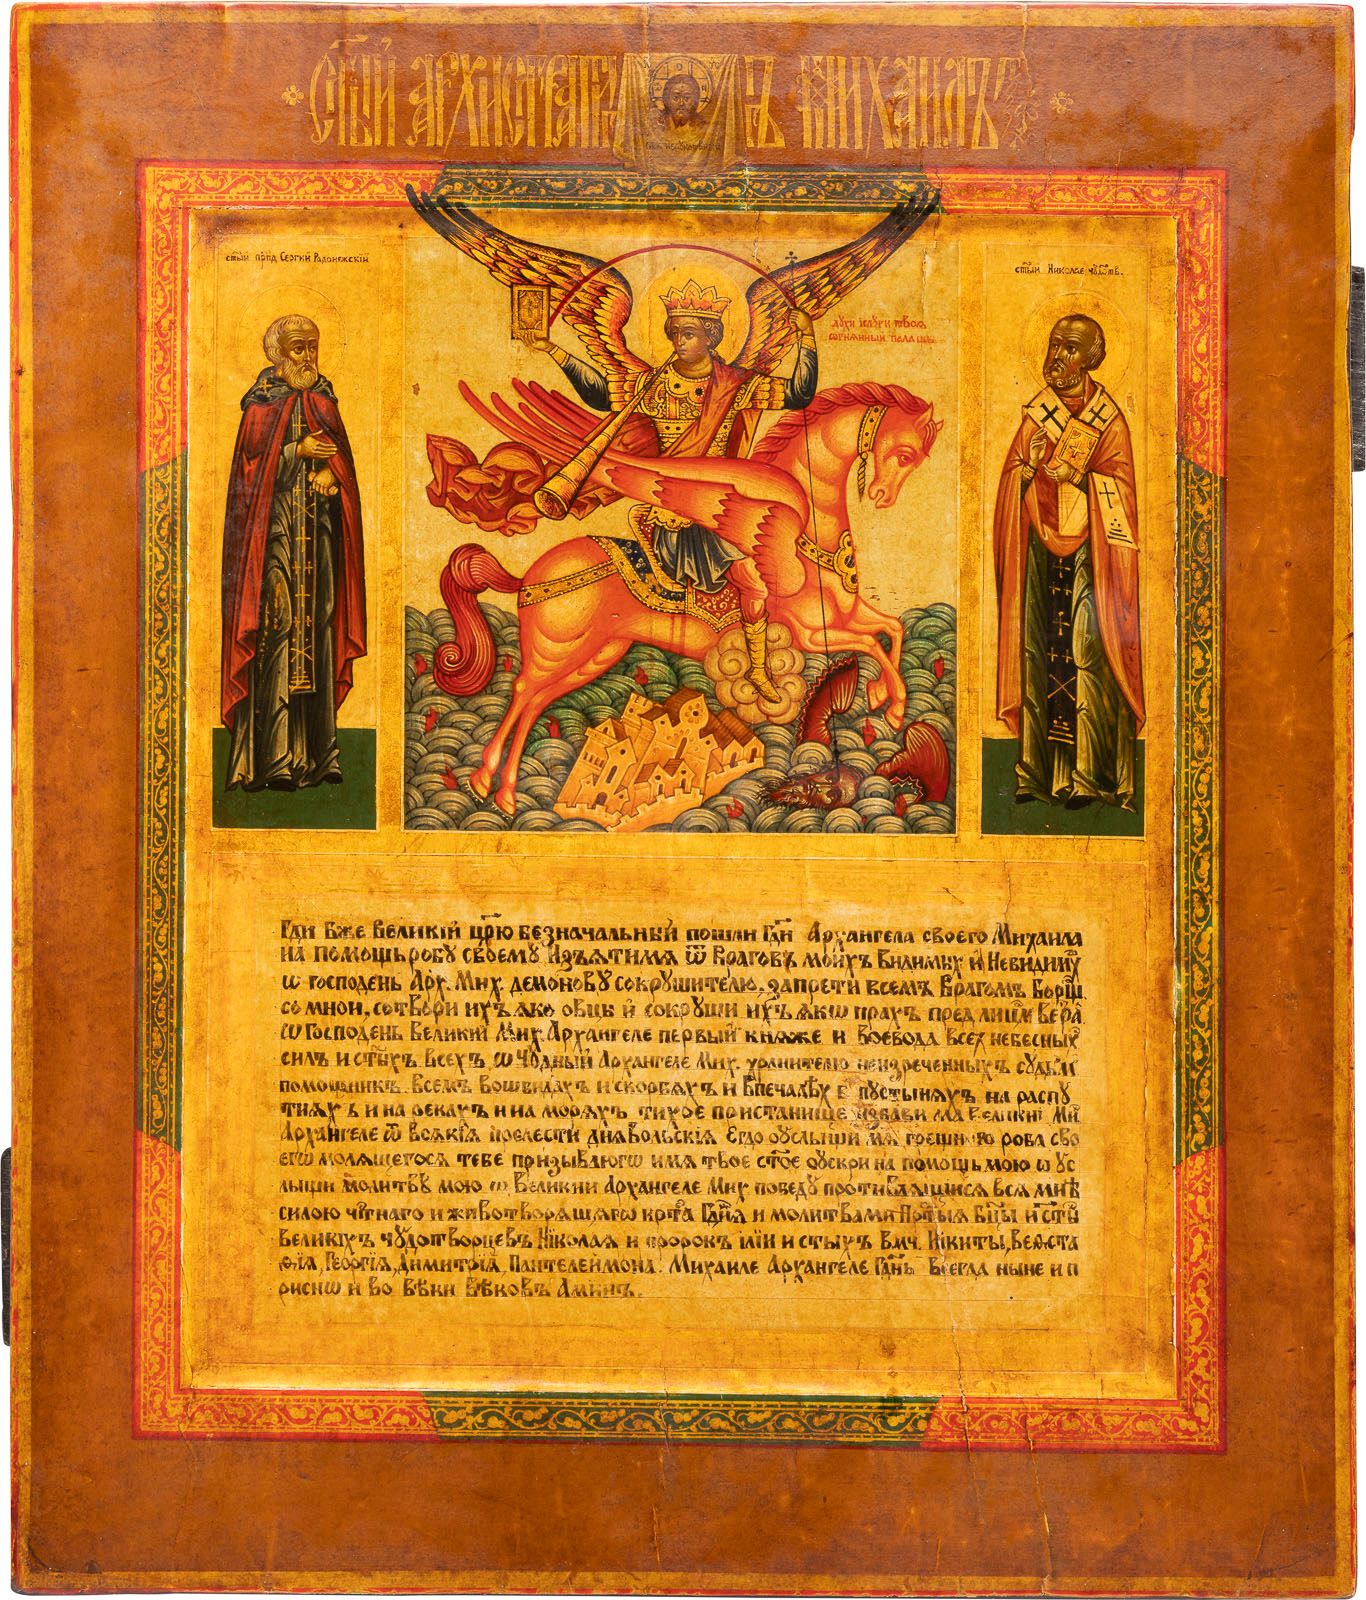 AN ICON SHOWING THE ARCHANGEL MICHAEL FLANKED BY ST. SERGEY ICONA CON IL SANTO A&hellip;